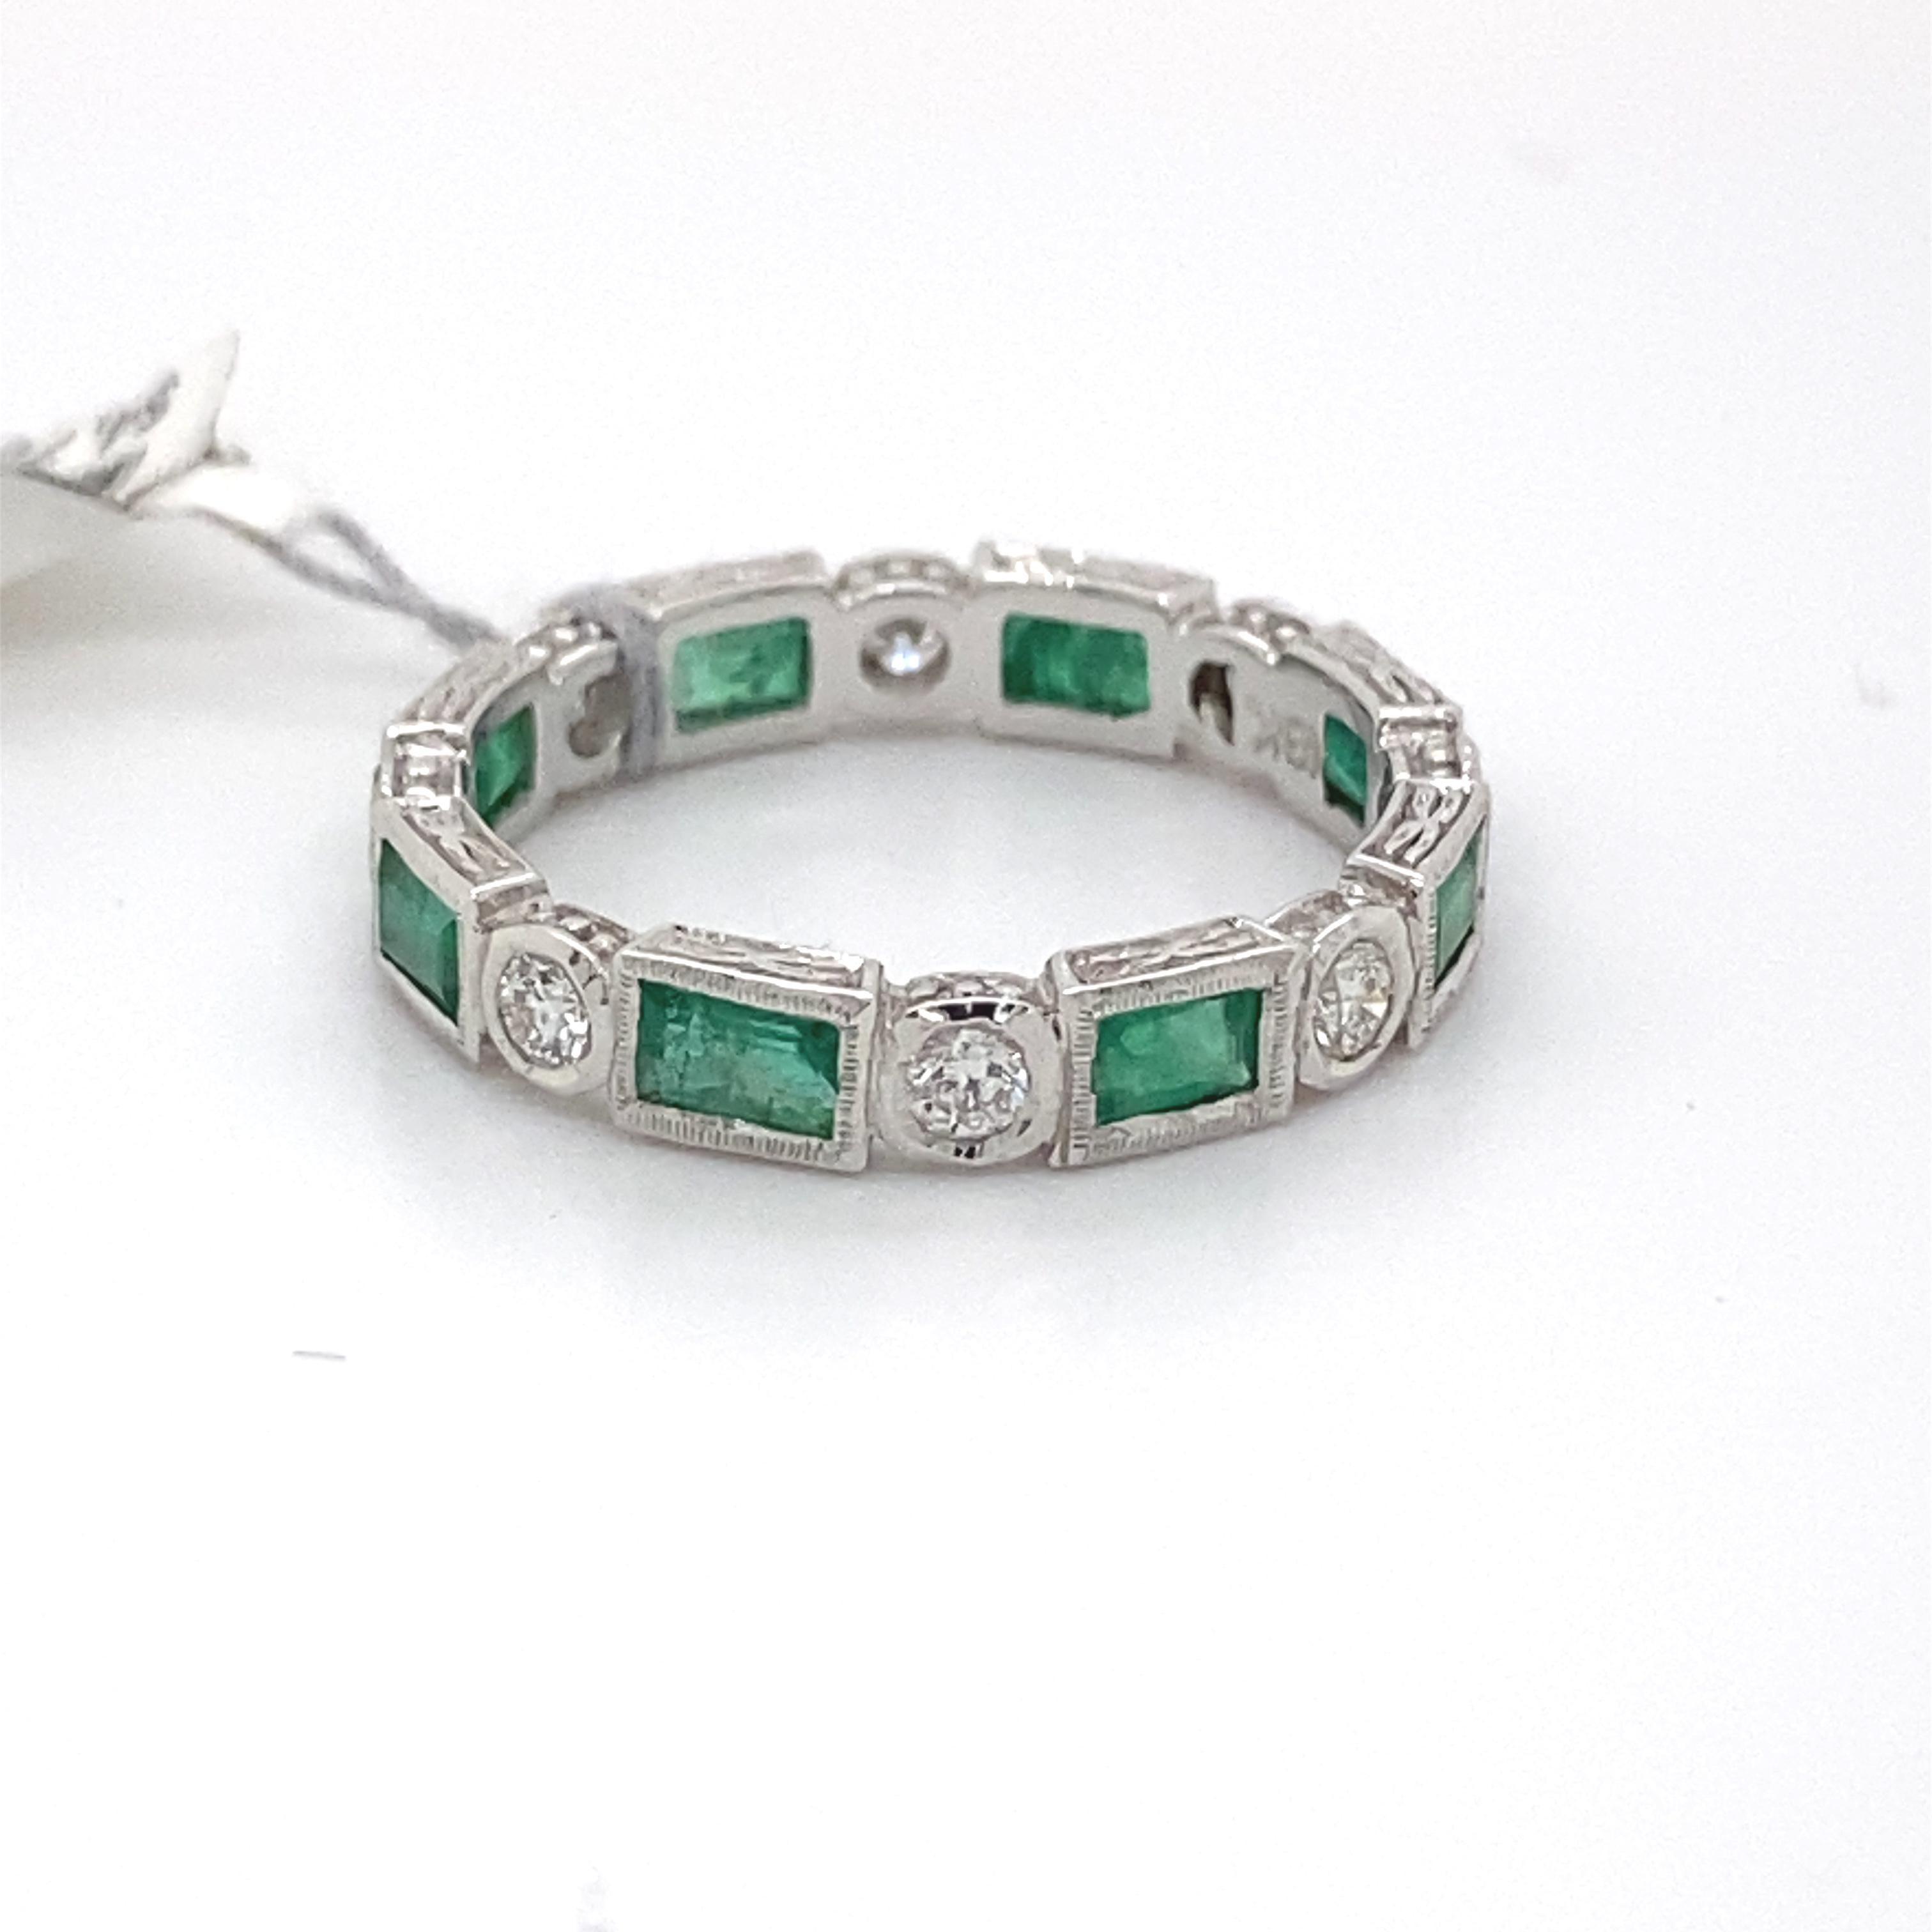 Art Deco style alternating emeralds and diamond eternity ring, with milgrain and filigree work.
8 baguette rubies, 1.05 carats. 8 round brilliant diamonds, 0.37 carats. Approximately G/H color and SI clarity. Bezel set in 18k white gold, size 6.5.